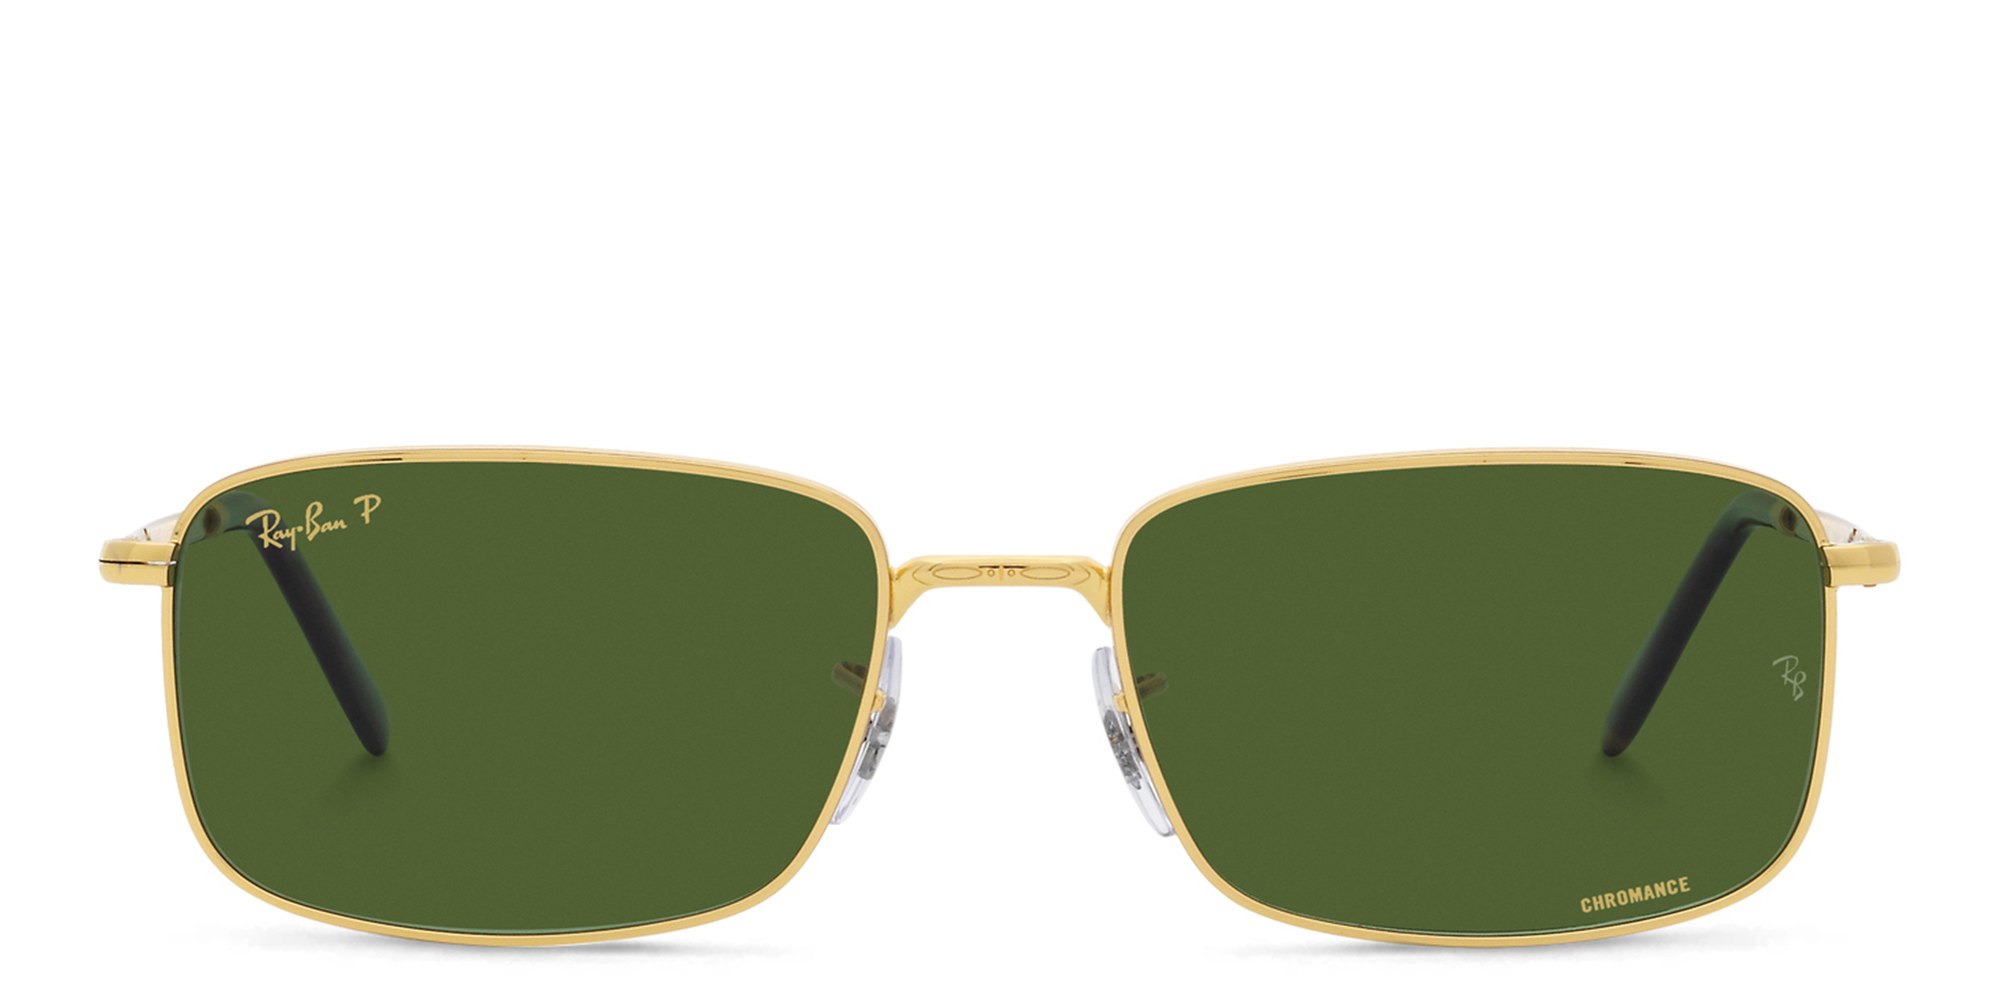 Unisex Rectangle Sunglasses, Gold - buy at the price of $245.04 in ...